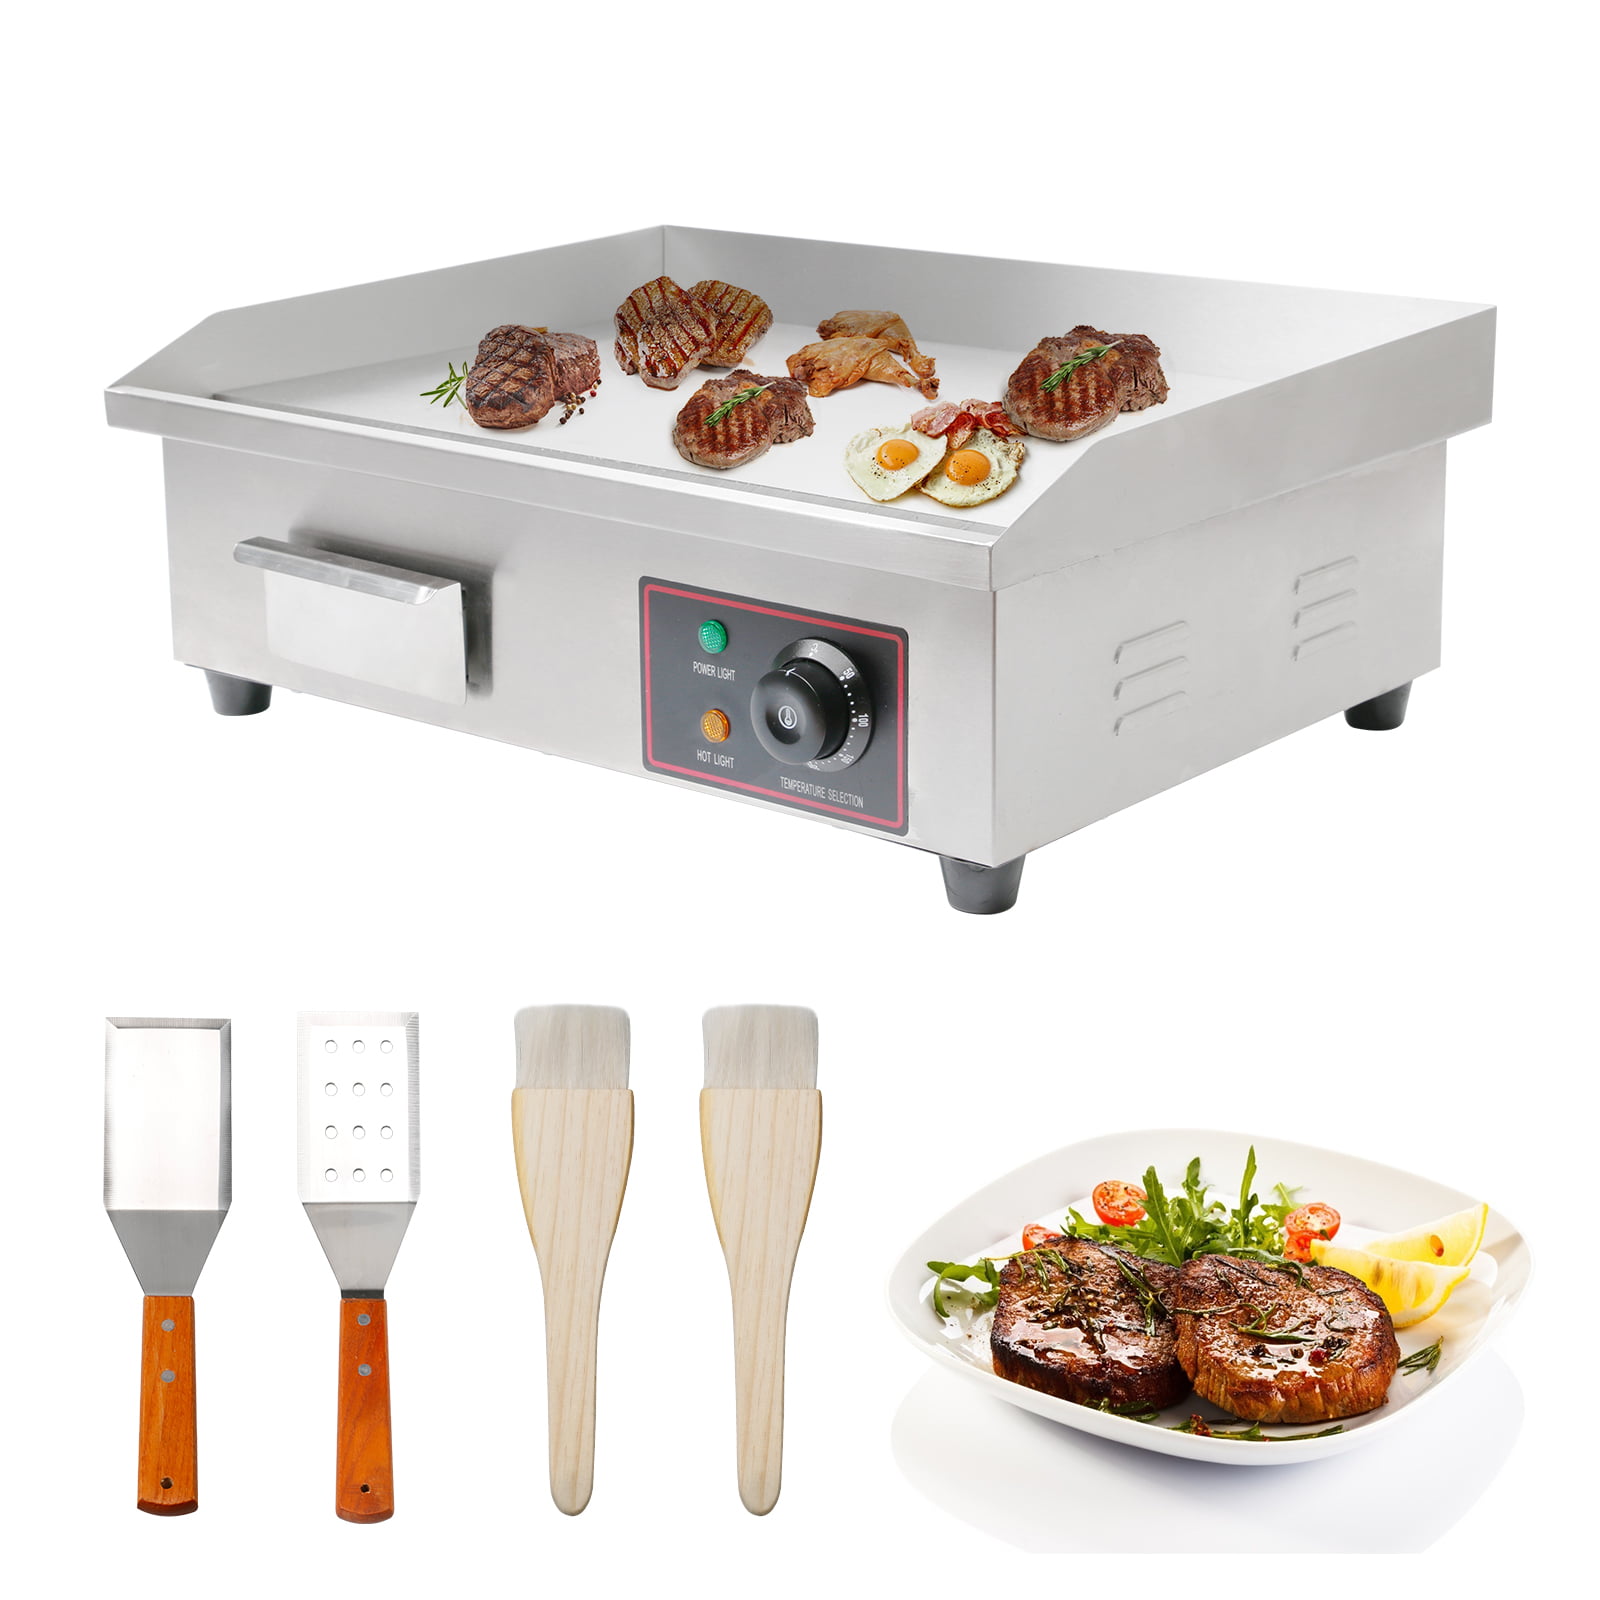 4400W Heavy Duty Restaurant Tabletop Flat Top BBQ Grill Machine Stainless Griller Equipment Kitchen Hotplate with Adjustable Temperature Control Commercial Electric Countertop Griddle 